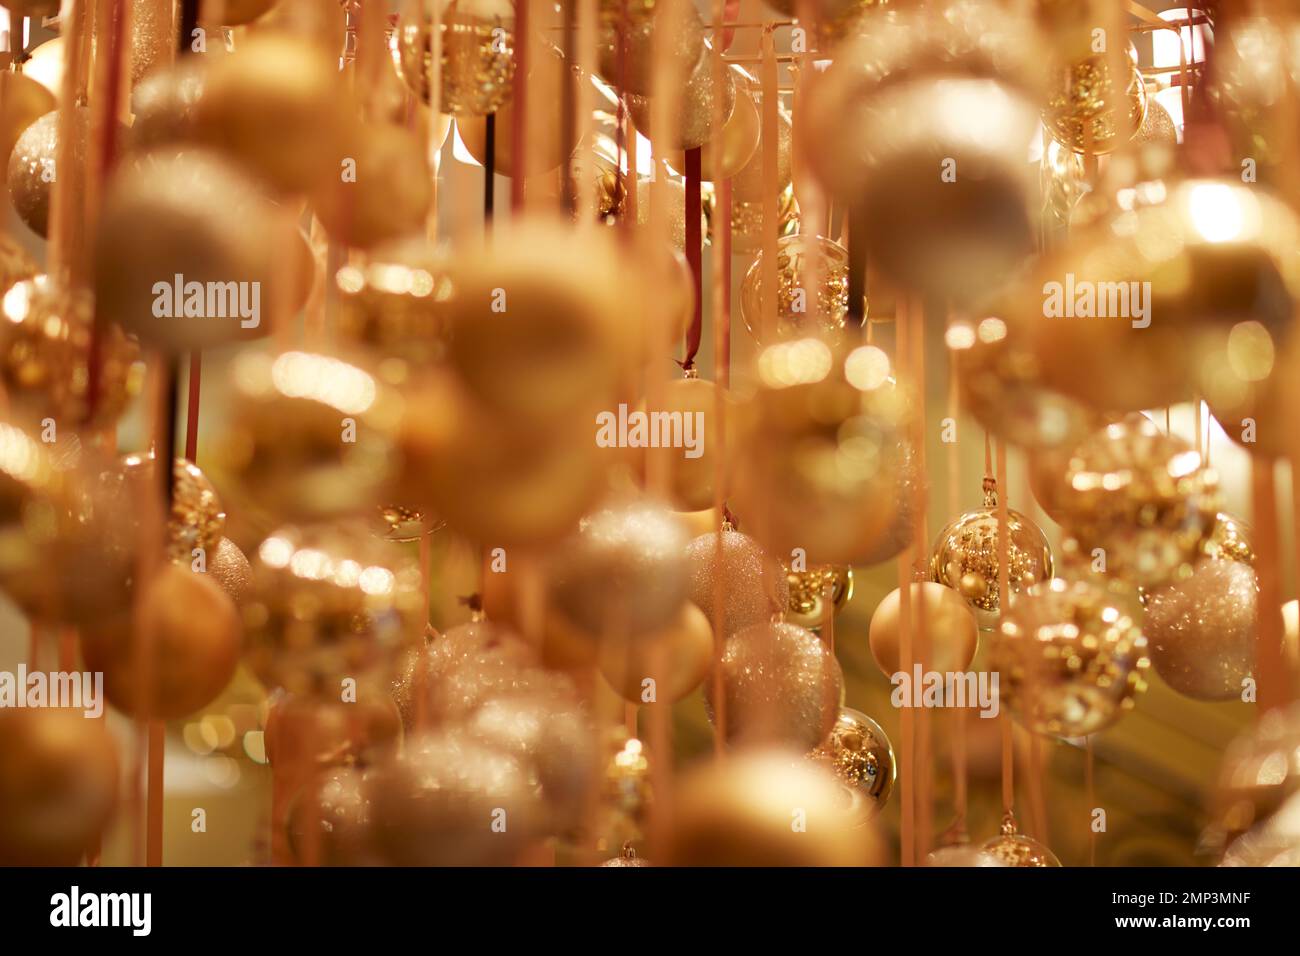 Gold Christmas baubles hanging overhead ribbon seasonal Xmas celebration soft focus drop focus ethereal magical party decoration Stock Photo